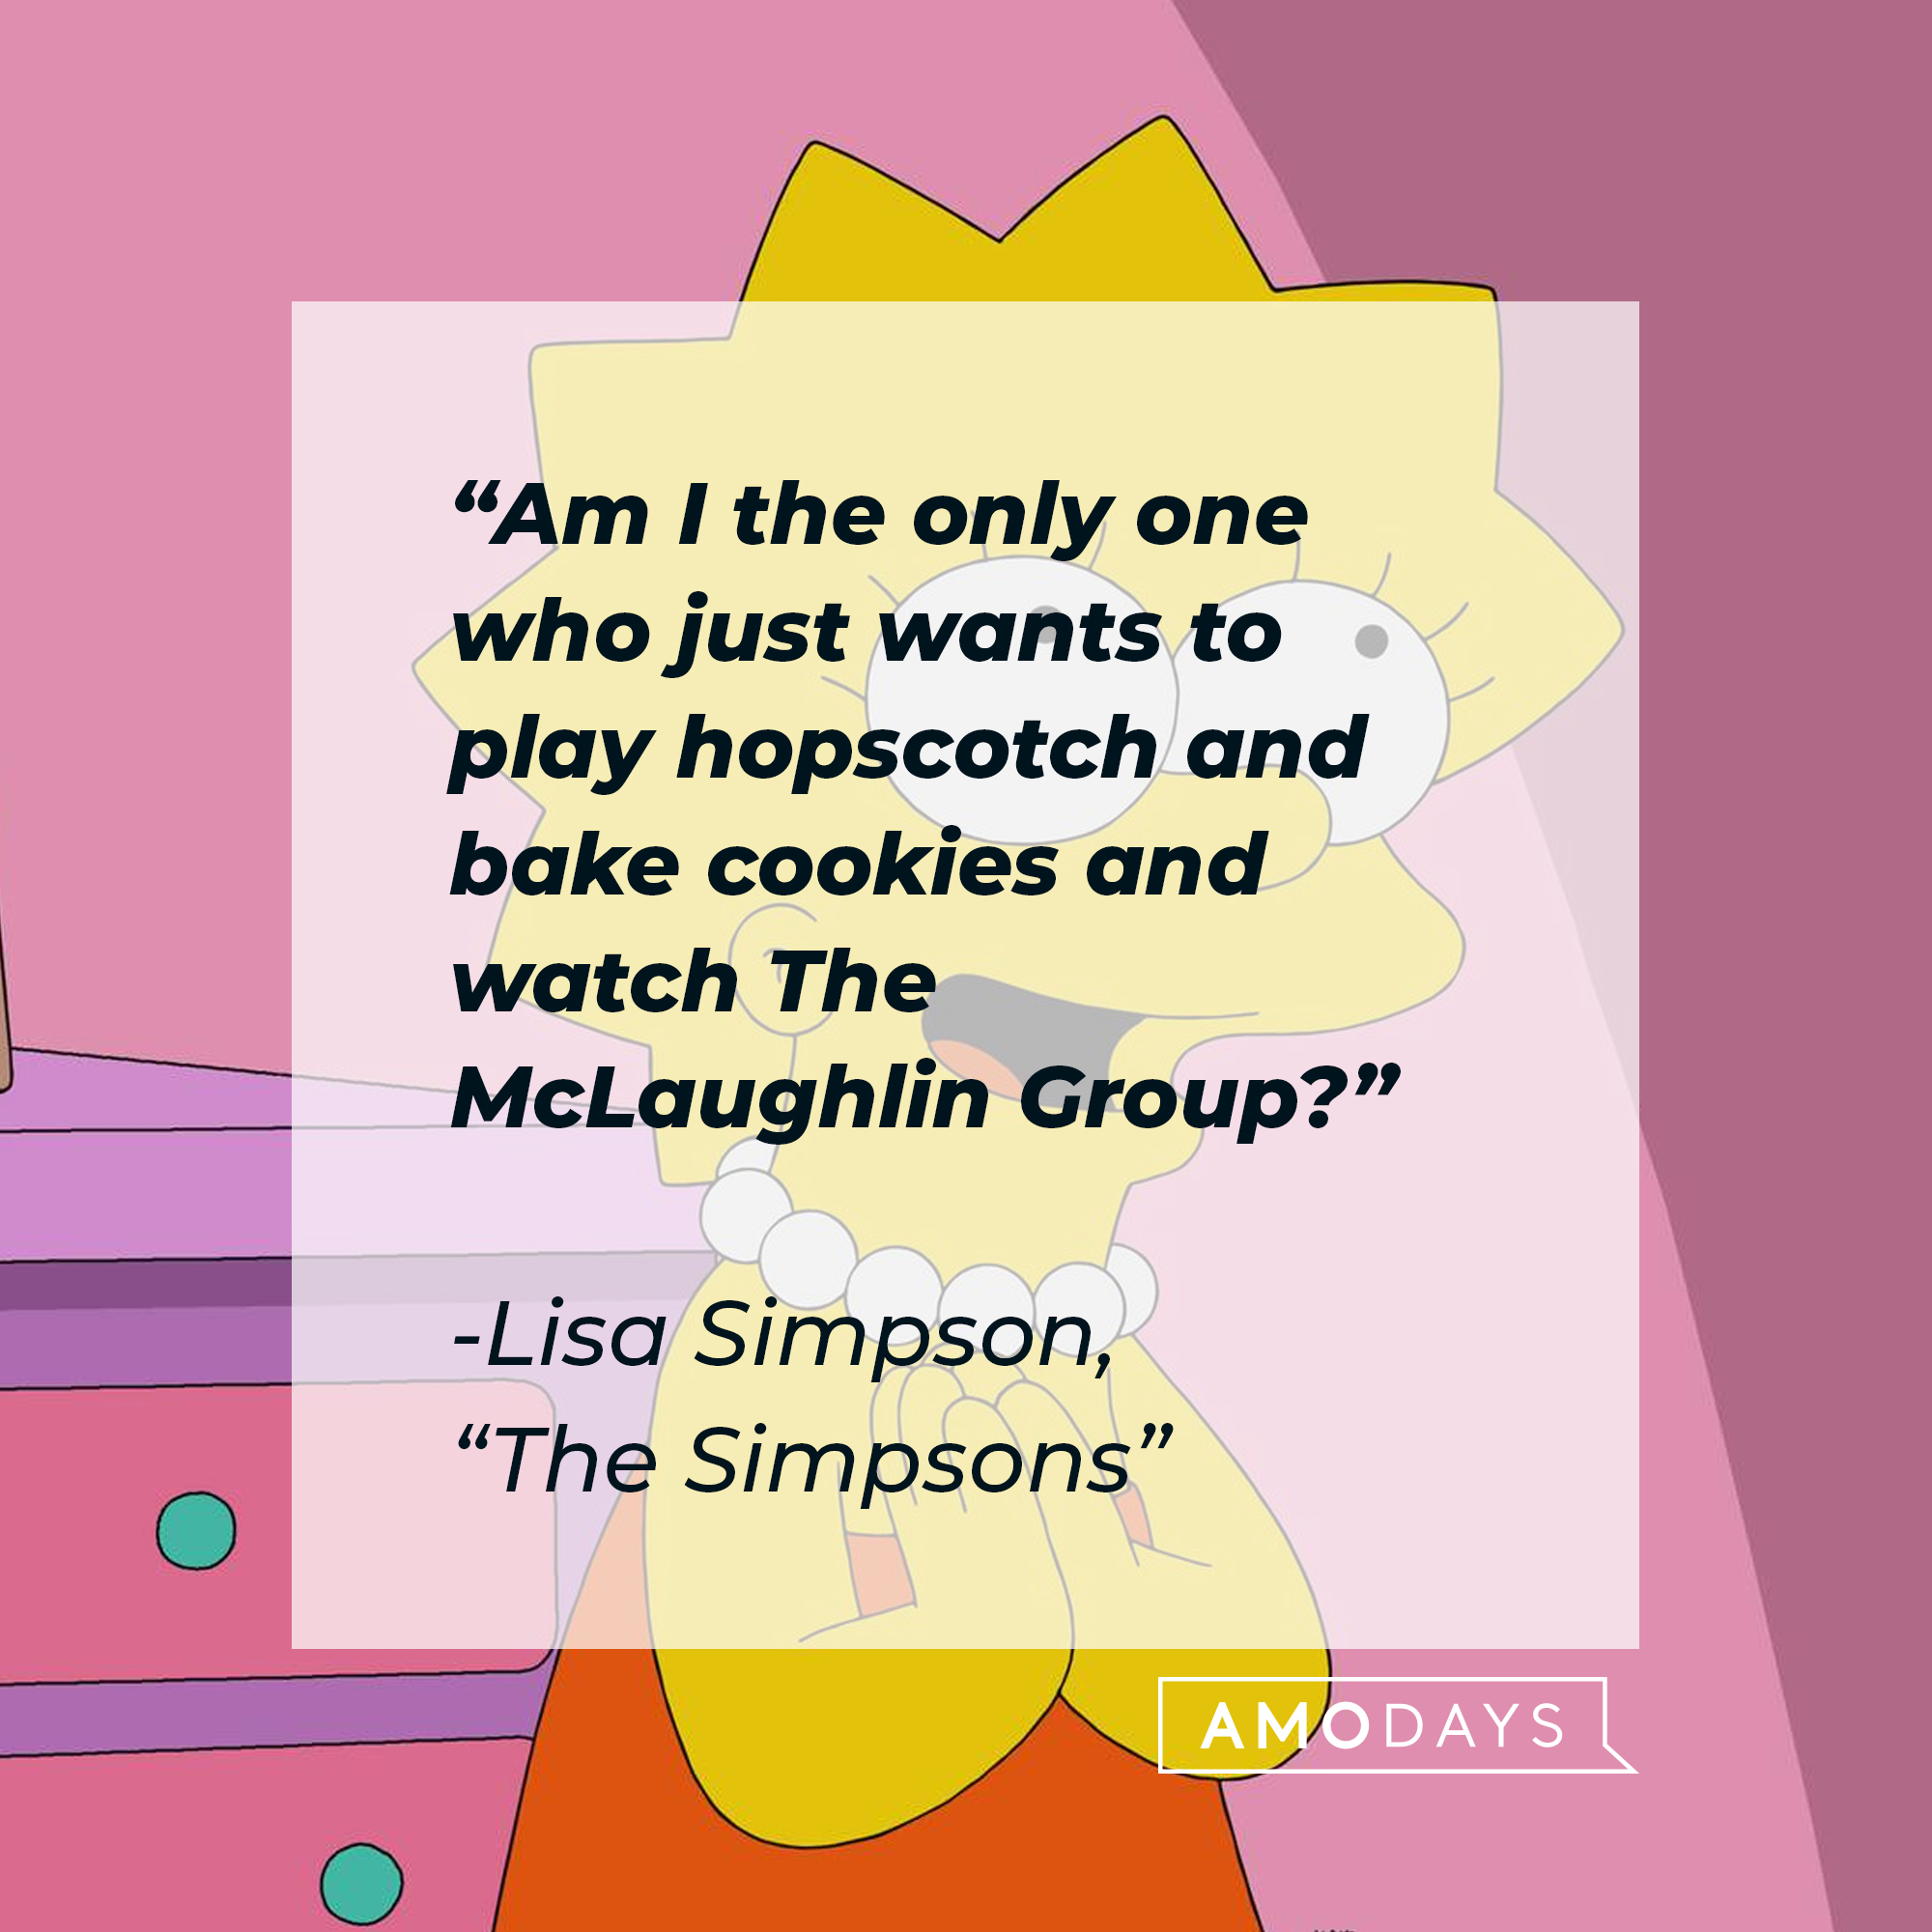 Lisa Simpson with her quote: “Am I the only one who just wants to play hopscotch and bake cookies and watch The McLaughlin Group?” | Source: Facebook.com/TheSimpsons